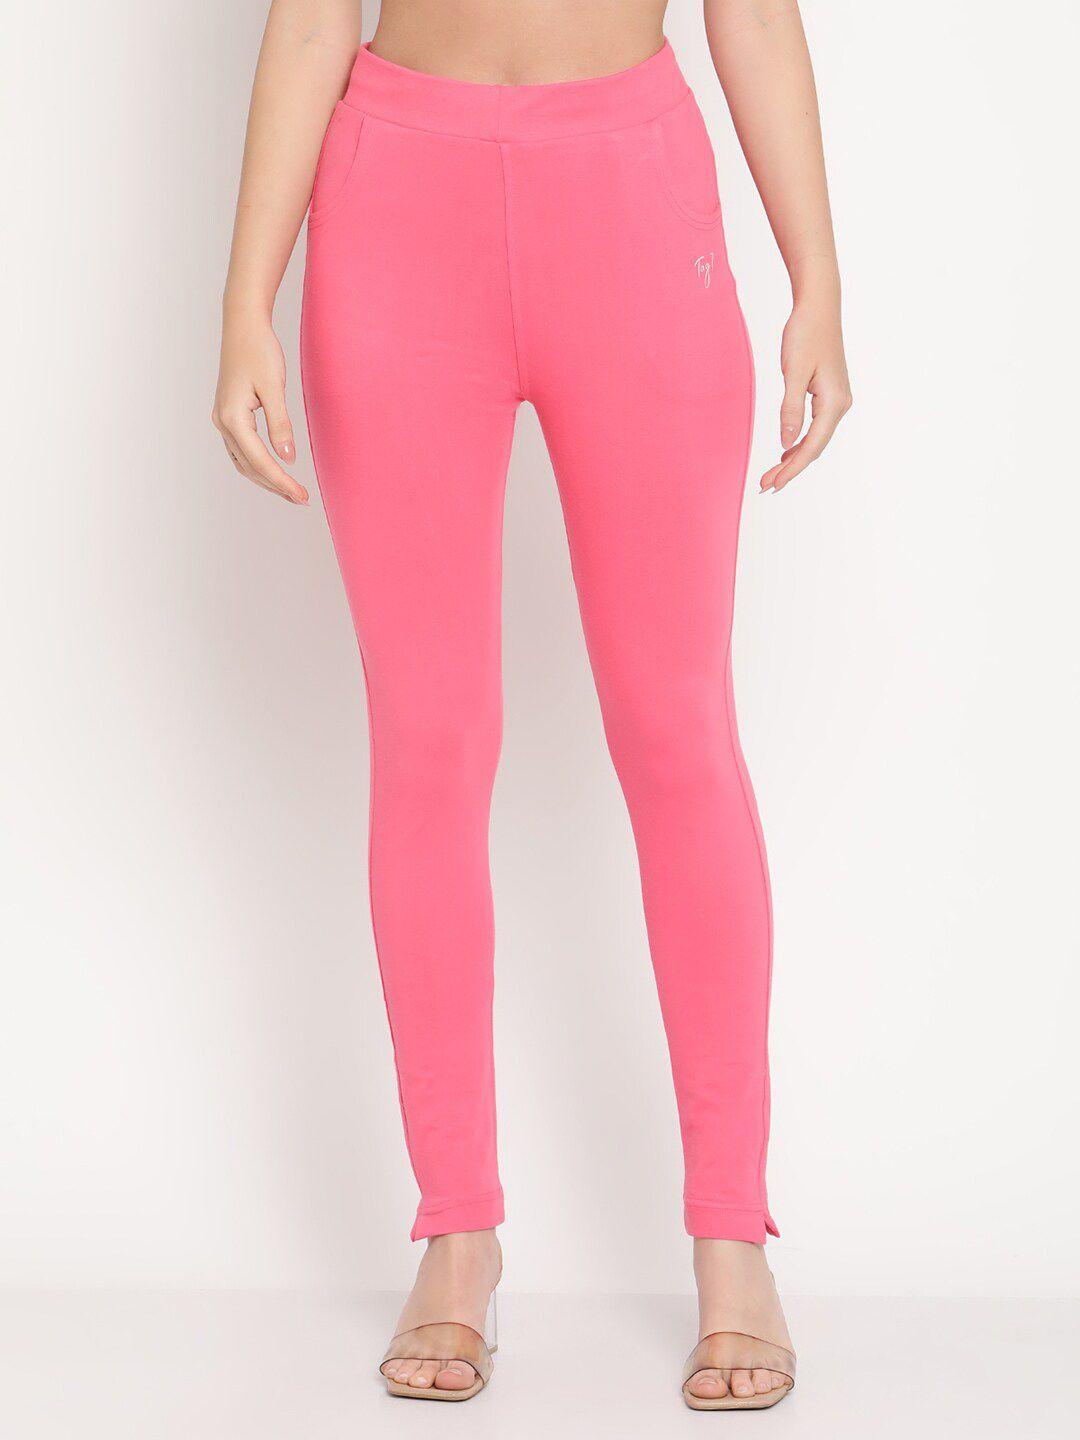 tag 7 women pink solid comfortable fit cotton jeggings